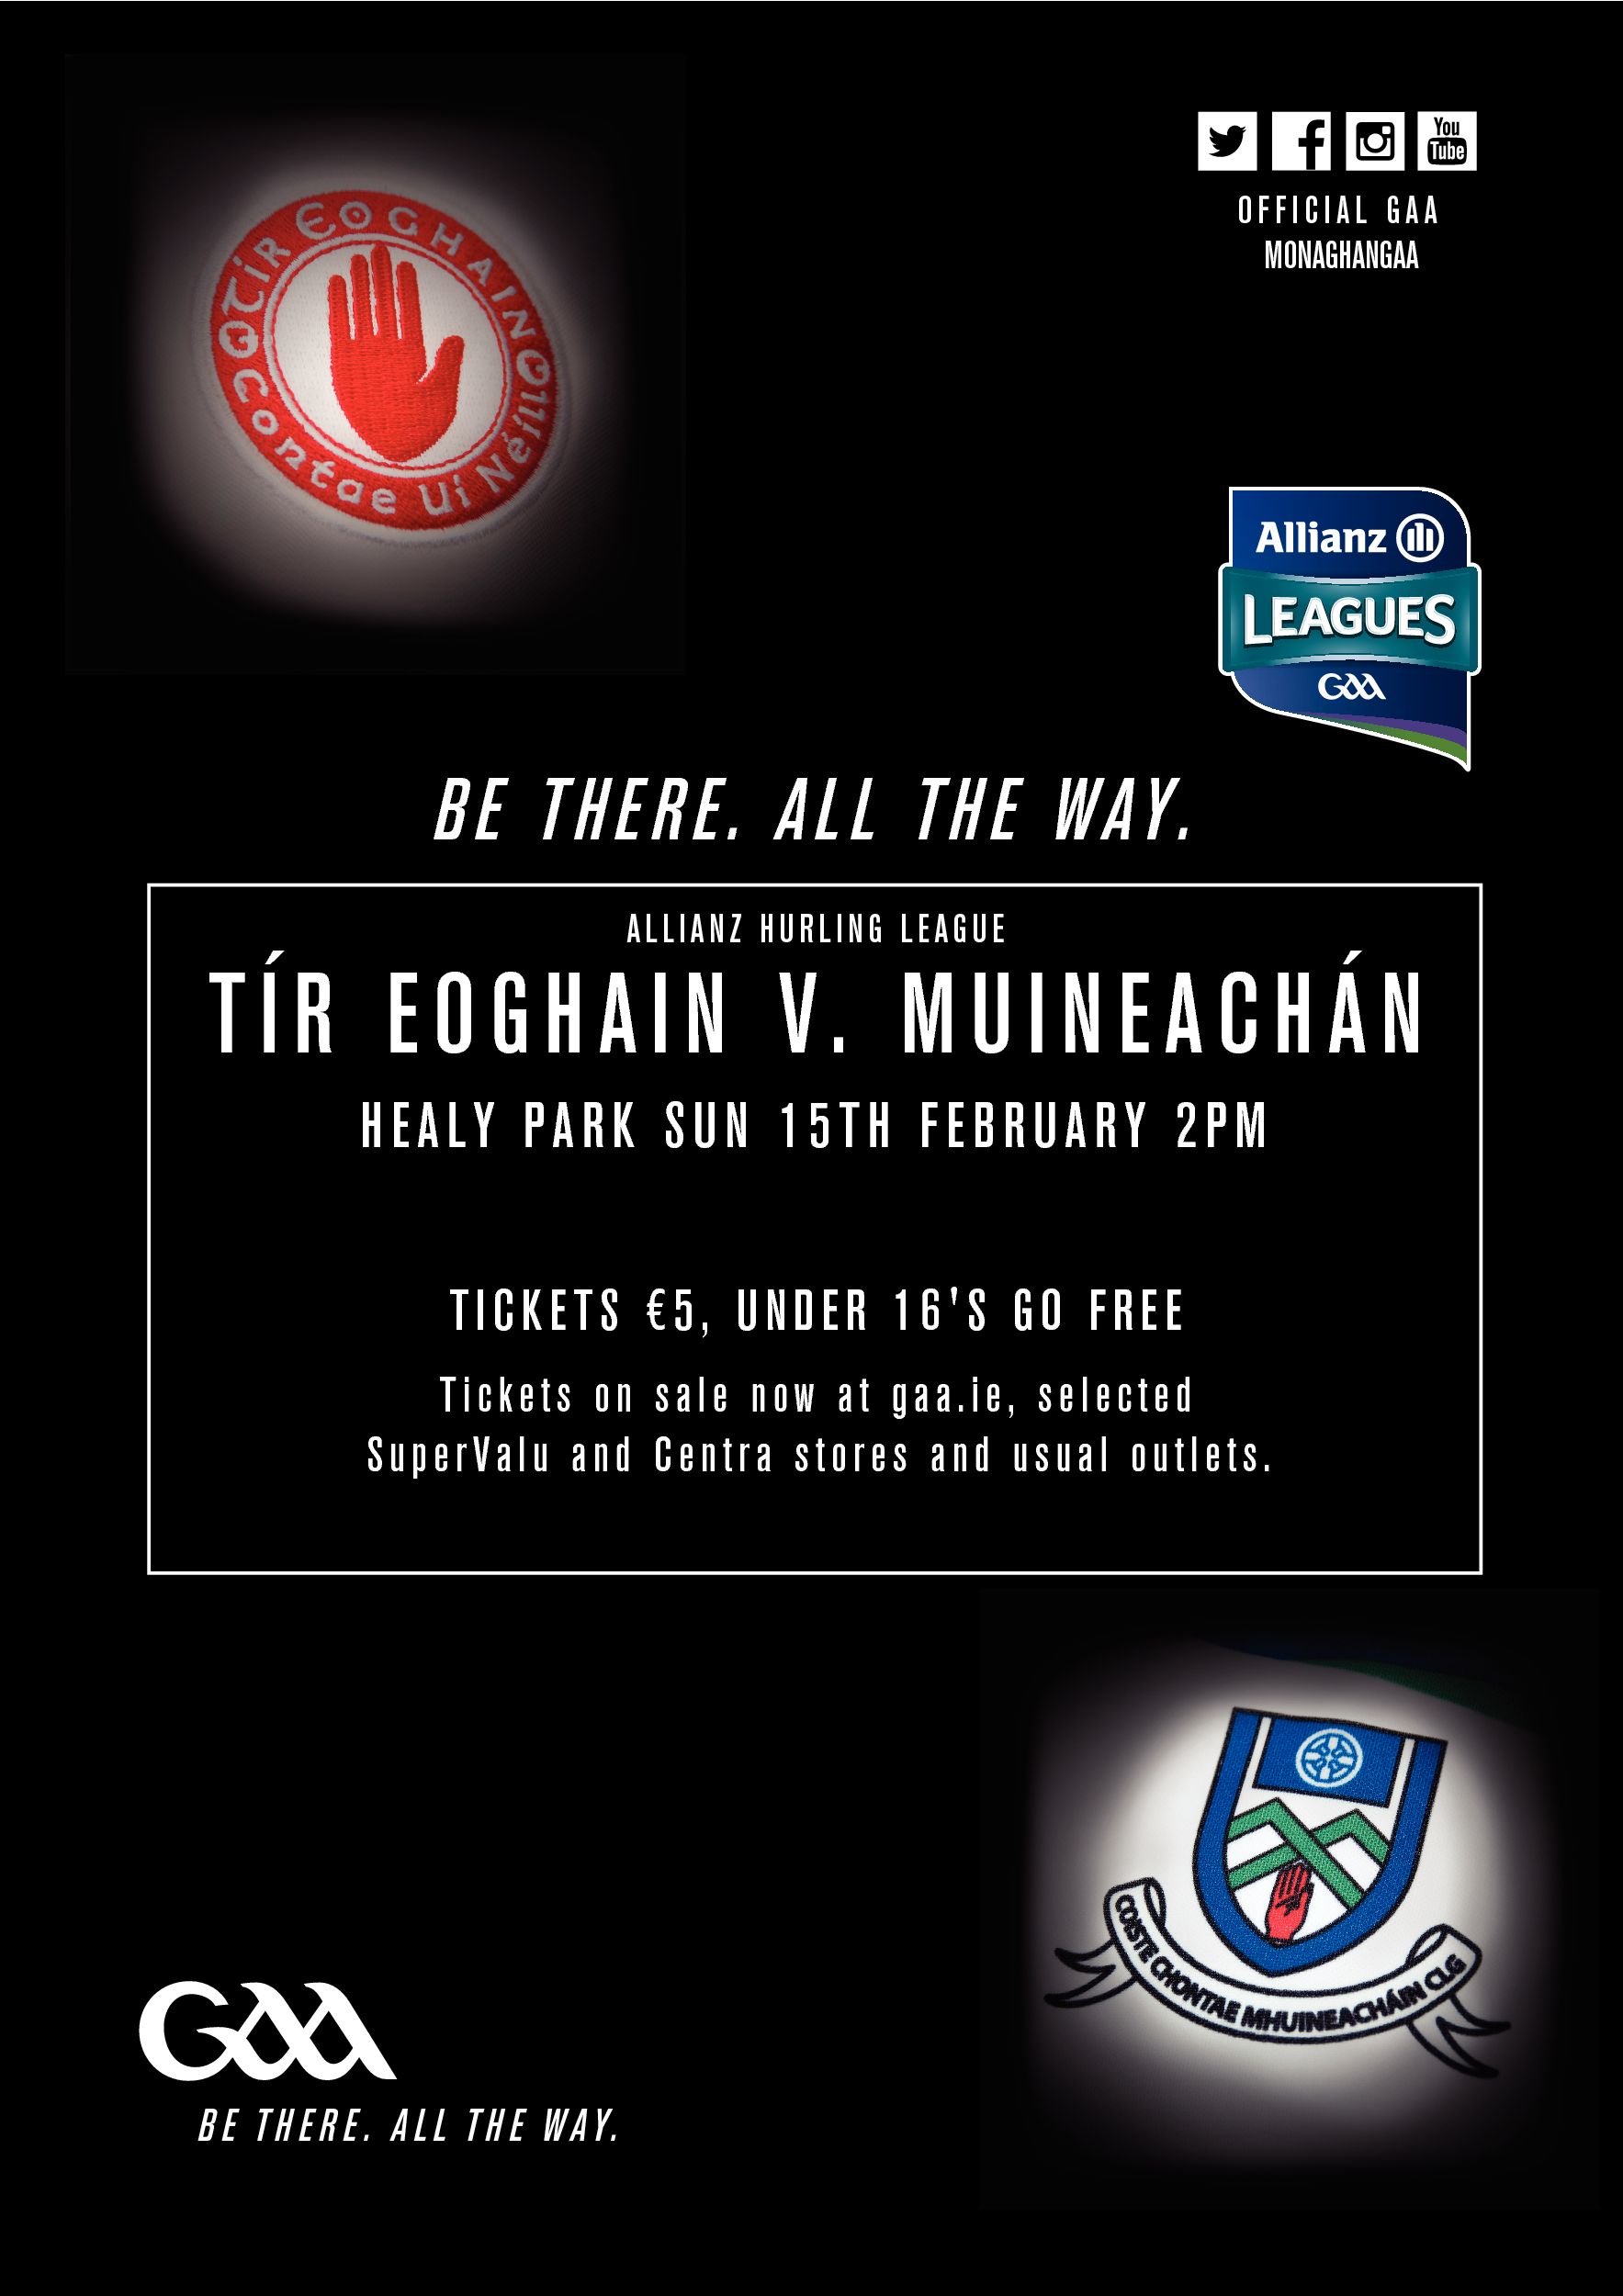 AHL Div 3A Monaghan v Tyrone Sunday at 2pm